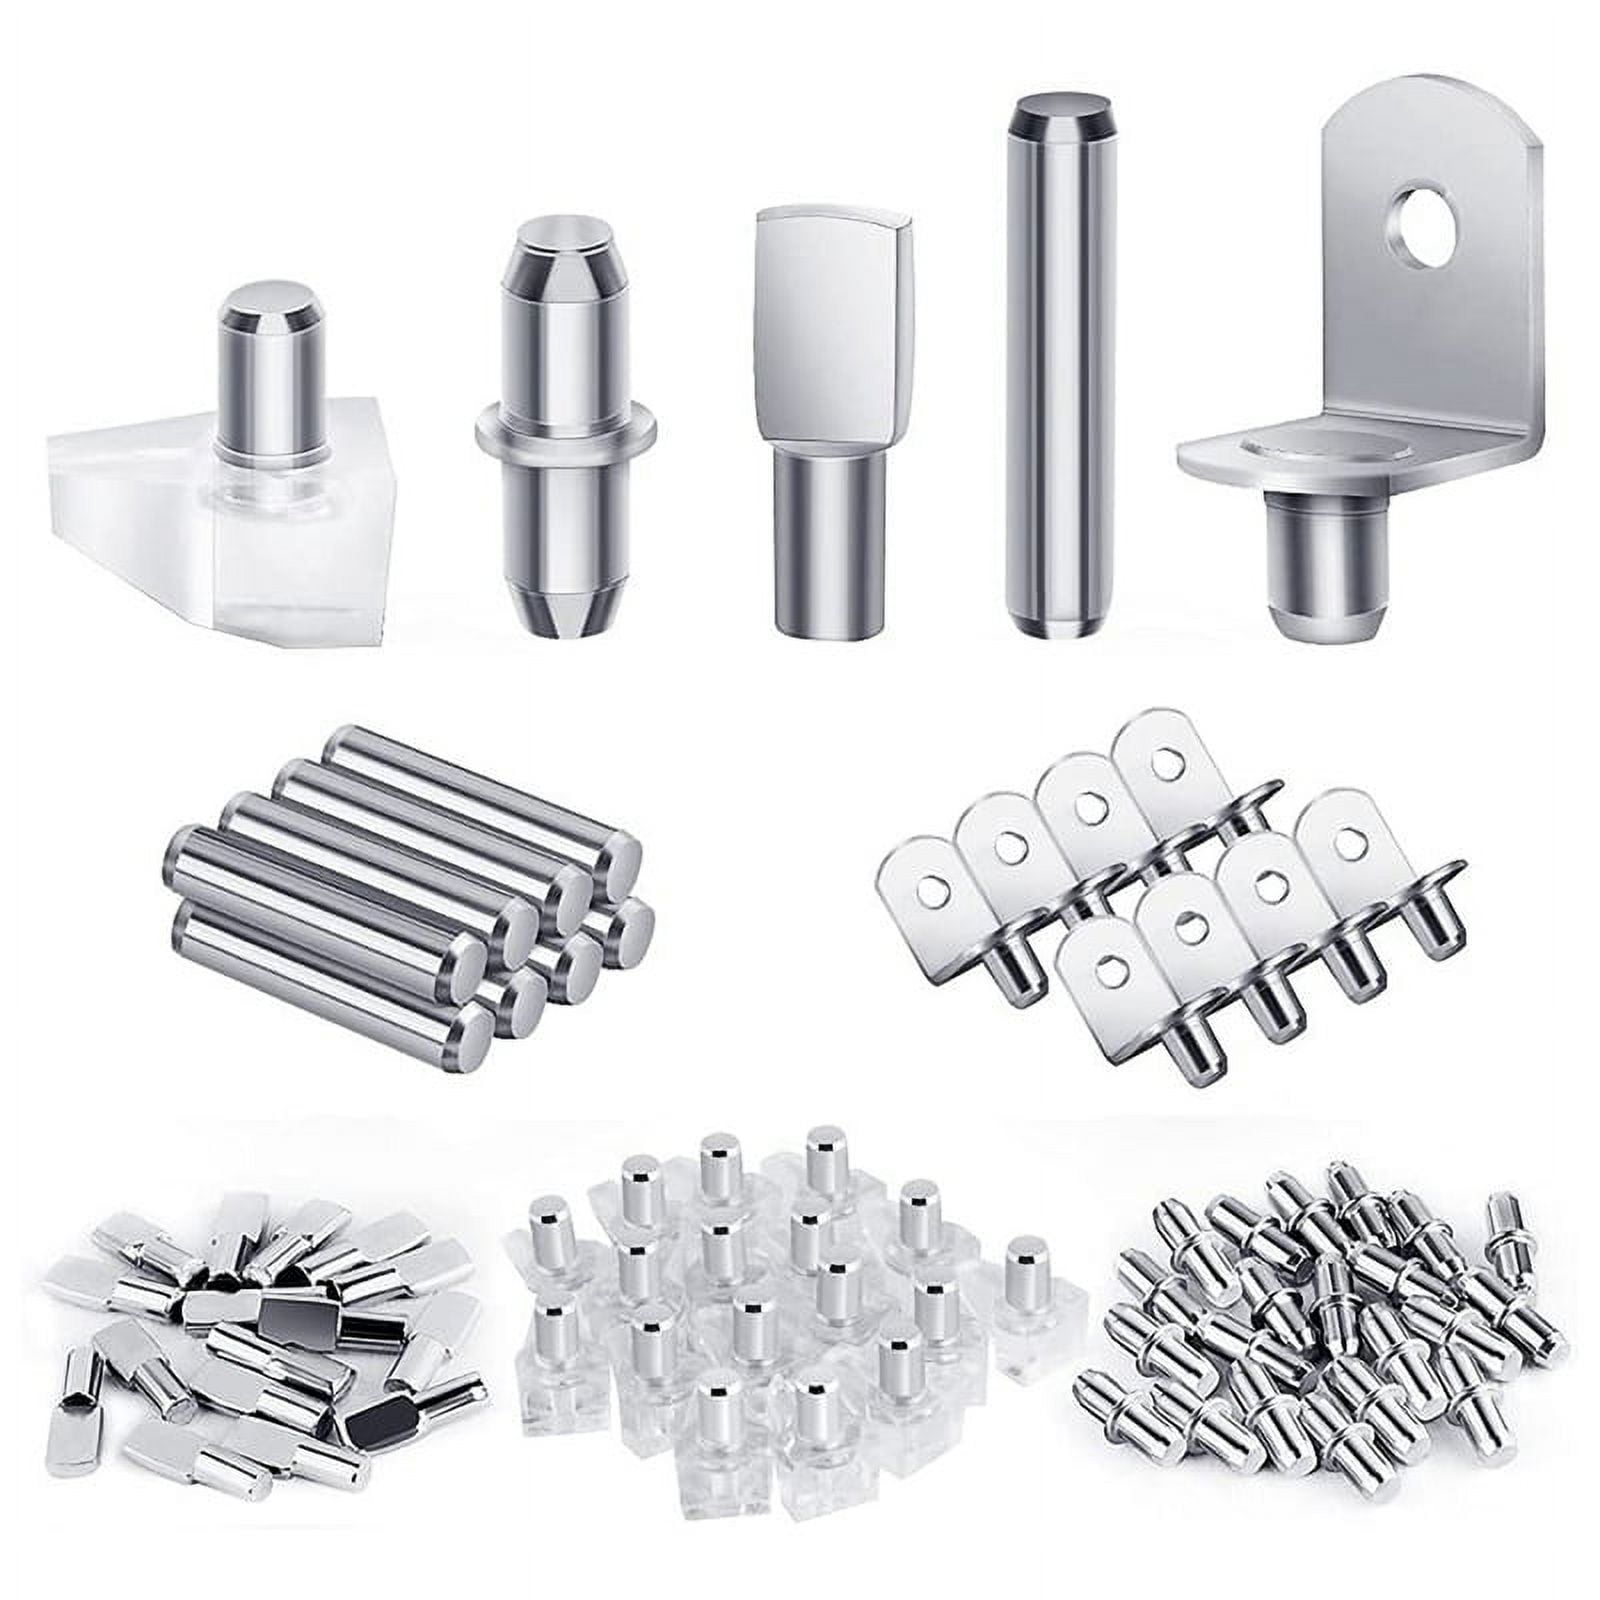 8 Pins 5mm Shelf Pegs Pins Cabinet Furniture Spoon Shape Support Pegs for  Shelves Nickel Plated 